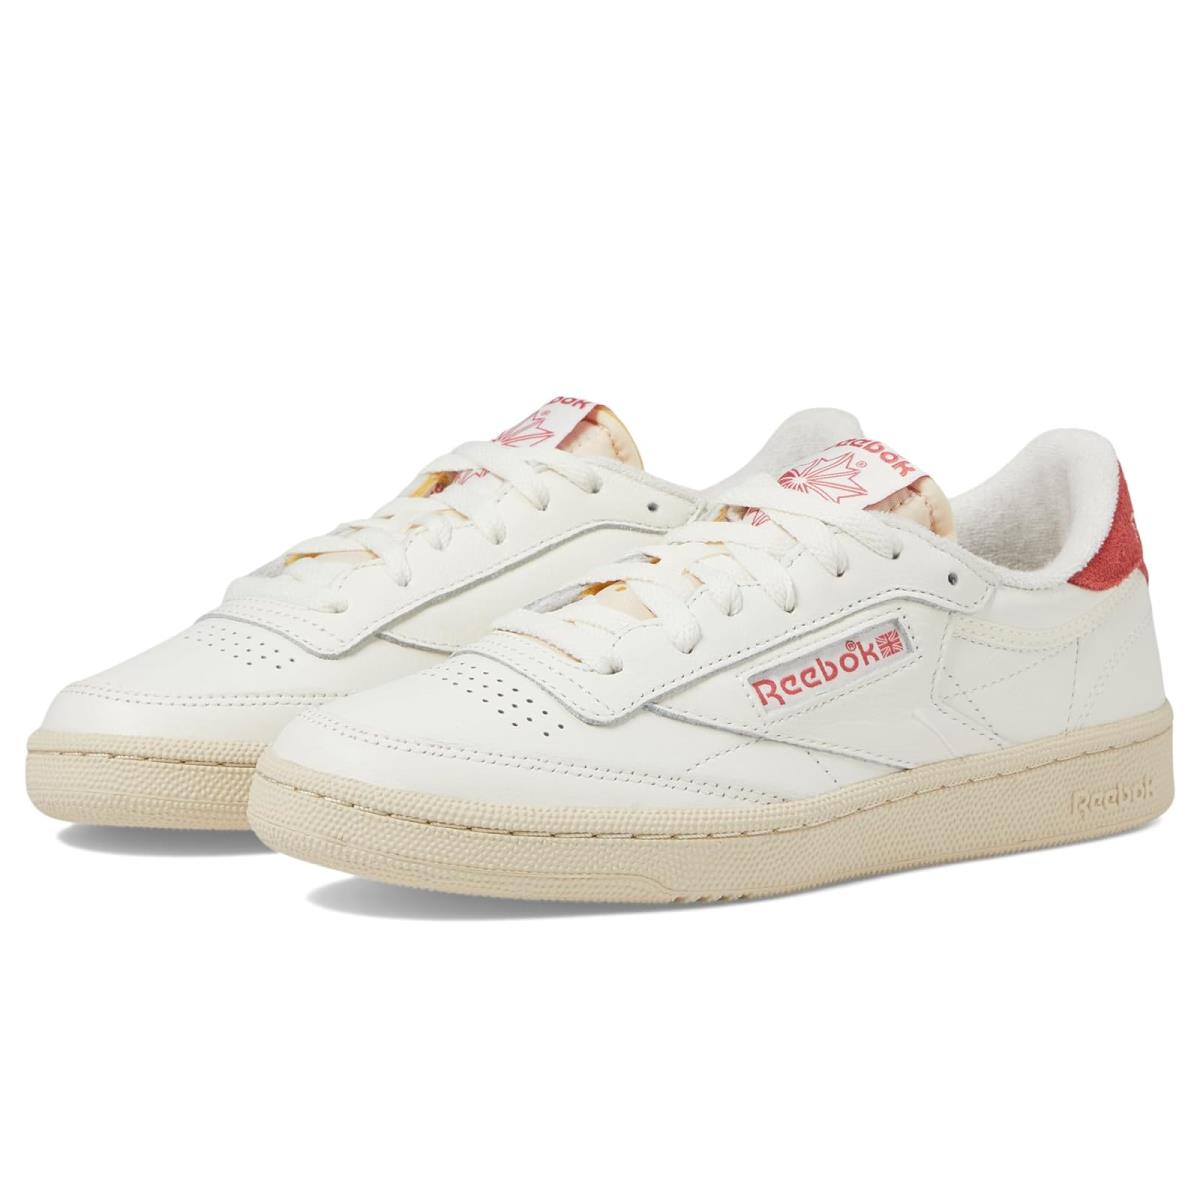 Woman`s Sneakers Athletic Shoes Reebok Lifestyle Club C 85 Chalk/Paper White/Astro Dust